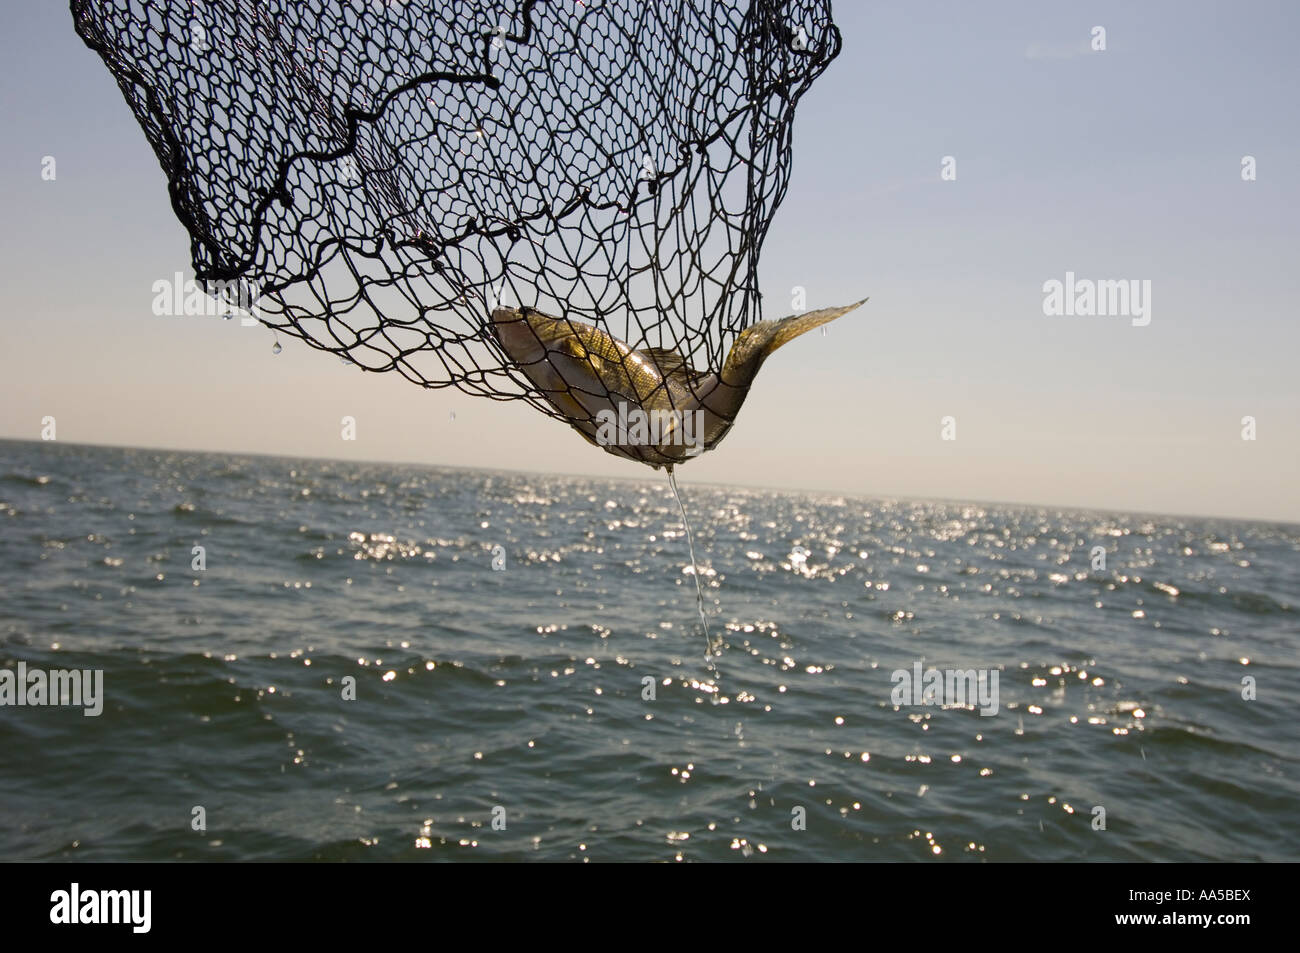 A WALLEYE IN A FISHING NET HANGS OVER THE HORIZON OF LAKE MILLE LACS NORTH  CENTRAL MINNESOTA Stock Photo - Alamy